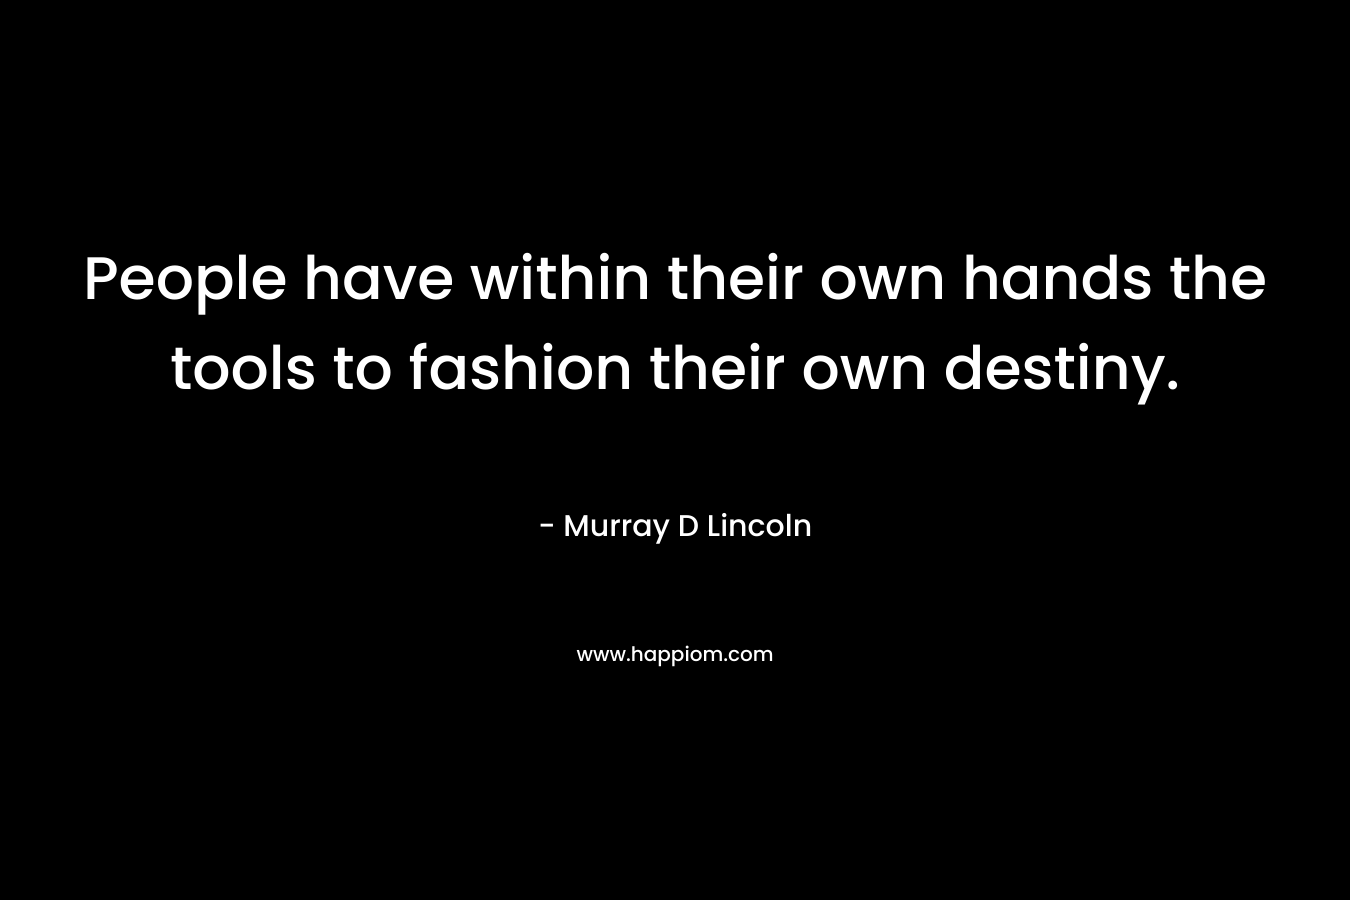 People have within their own hands the tools to fashion their own destiny.